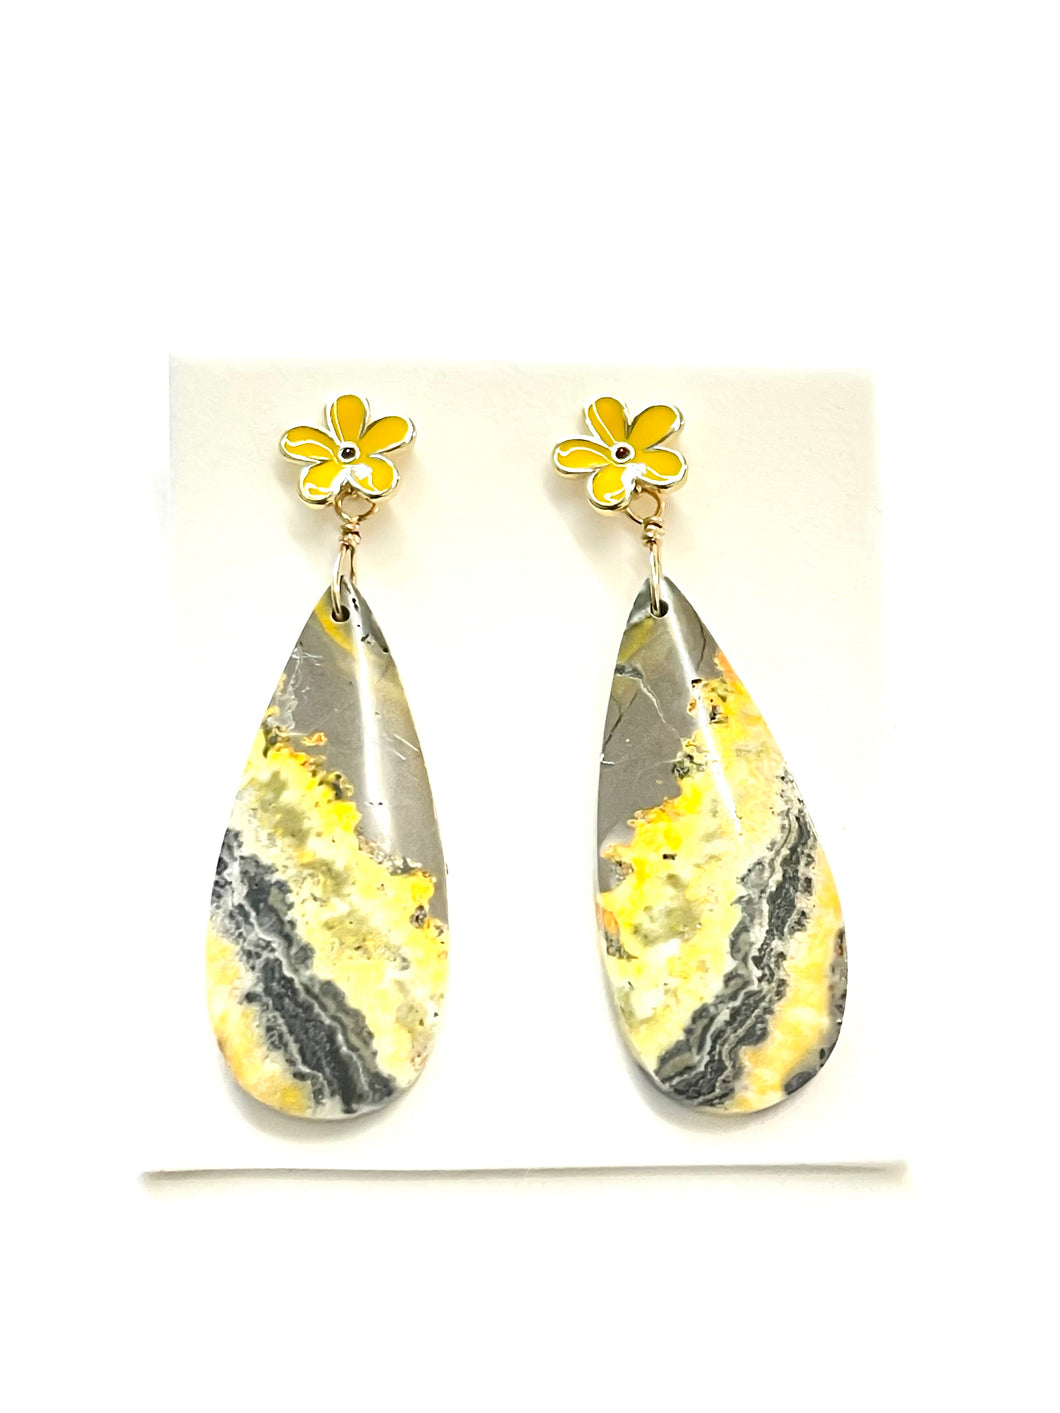 Earrings with beautiful bubble bee jasper and flower studs